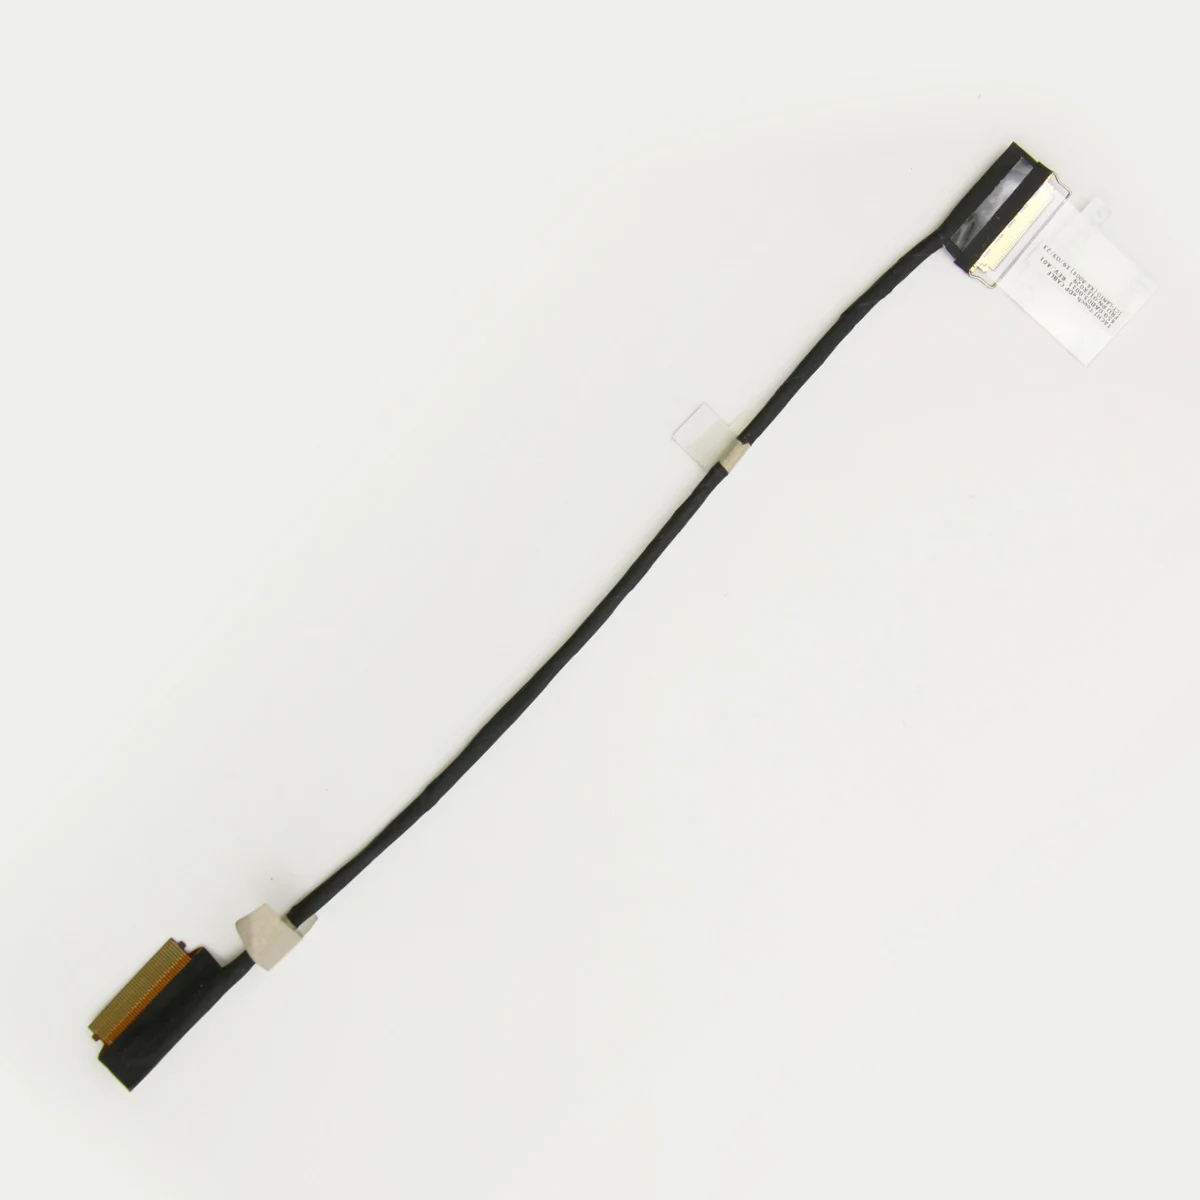 

Touch eDP Cable For Lenovo ThinkPad T570 T580 P51s P52s LCD Touch Display FHD 40pins FFC Flex Cable FRU 01ER029 450.0AB03.0011